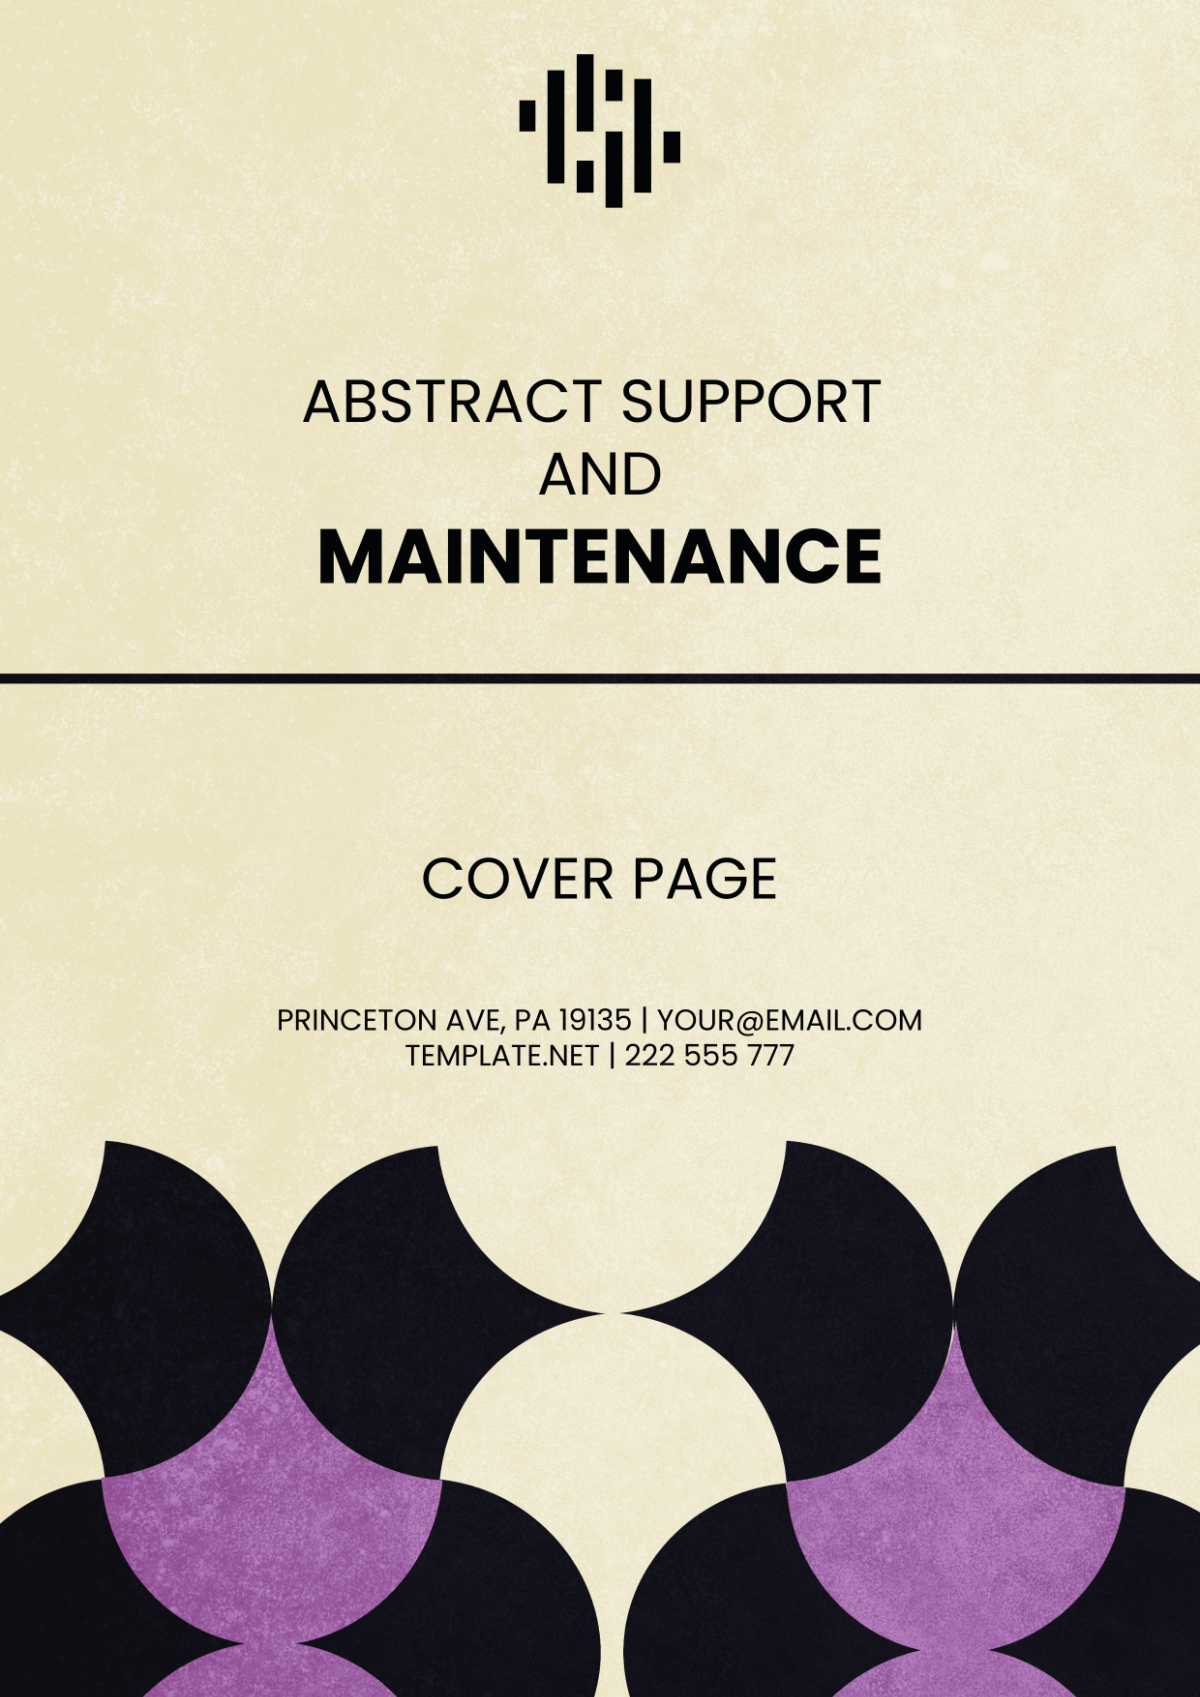 Abstract Support and Maintenance Cover Page